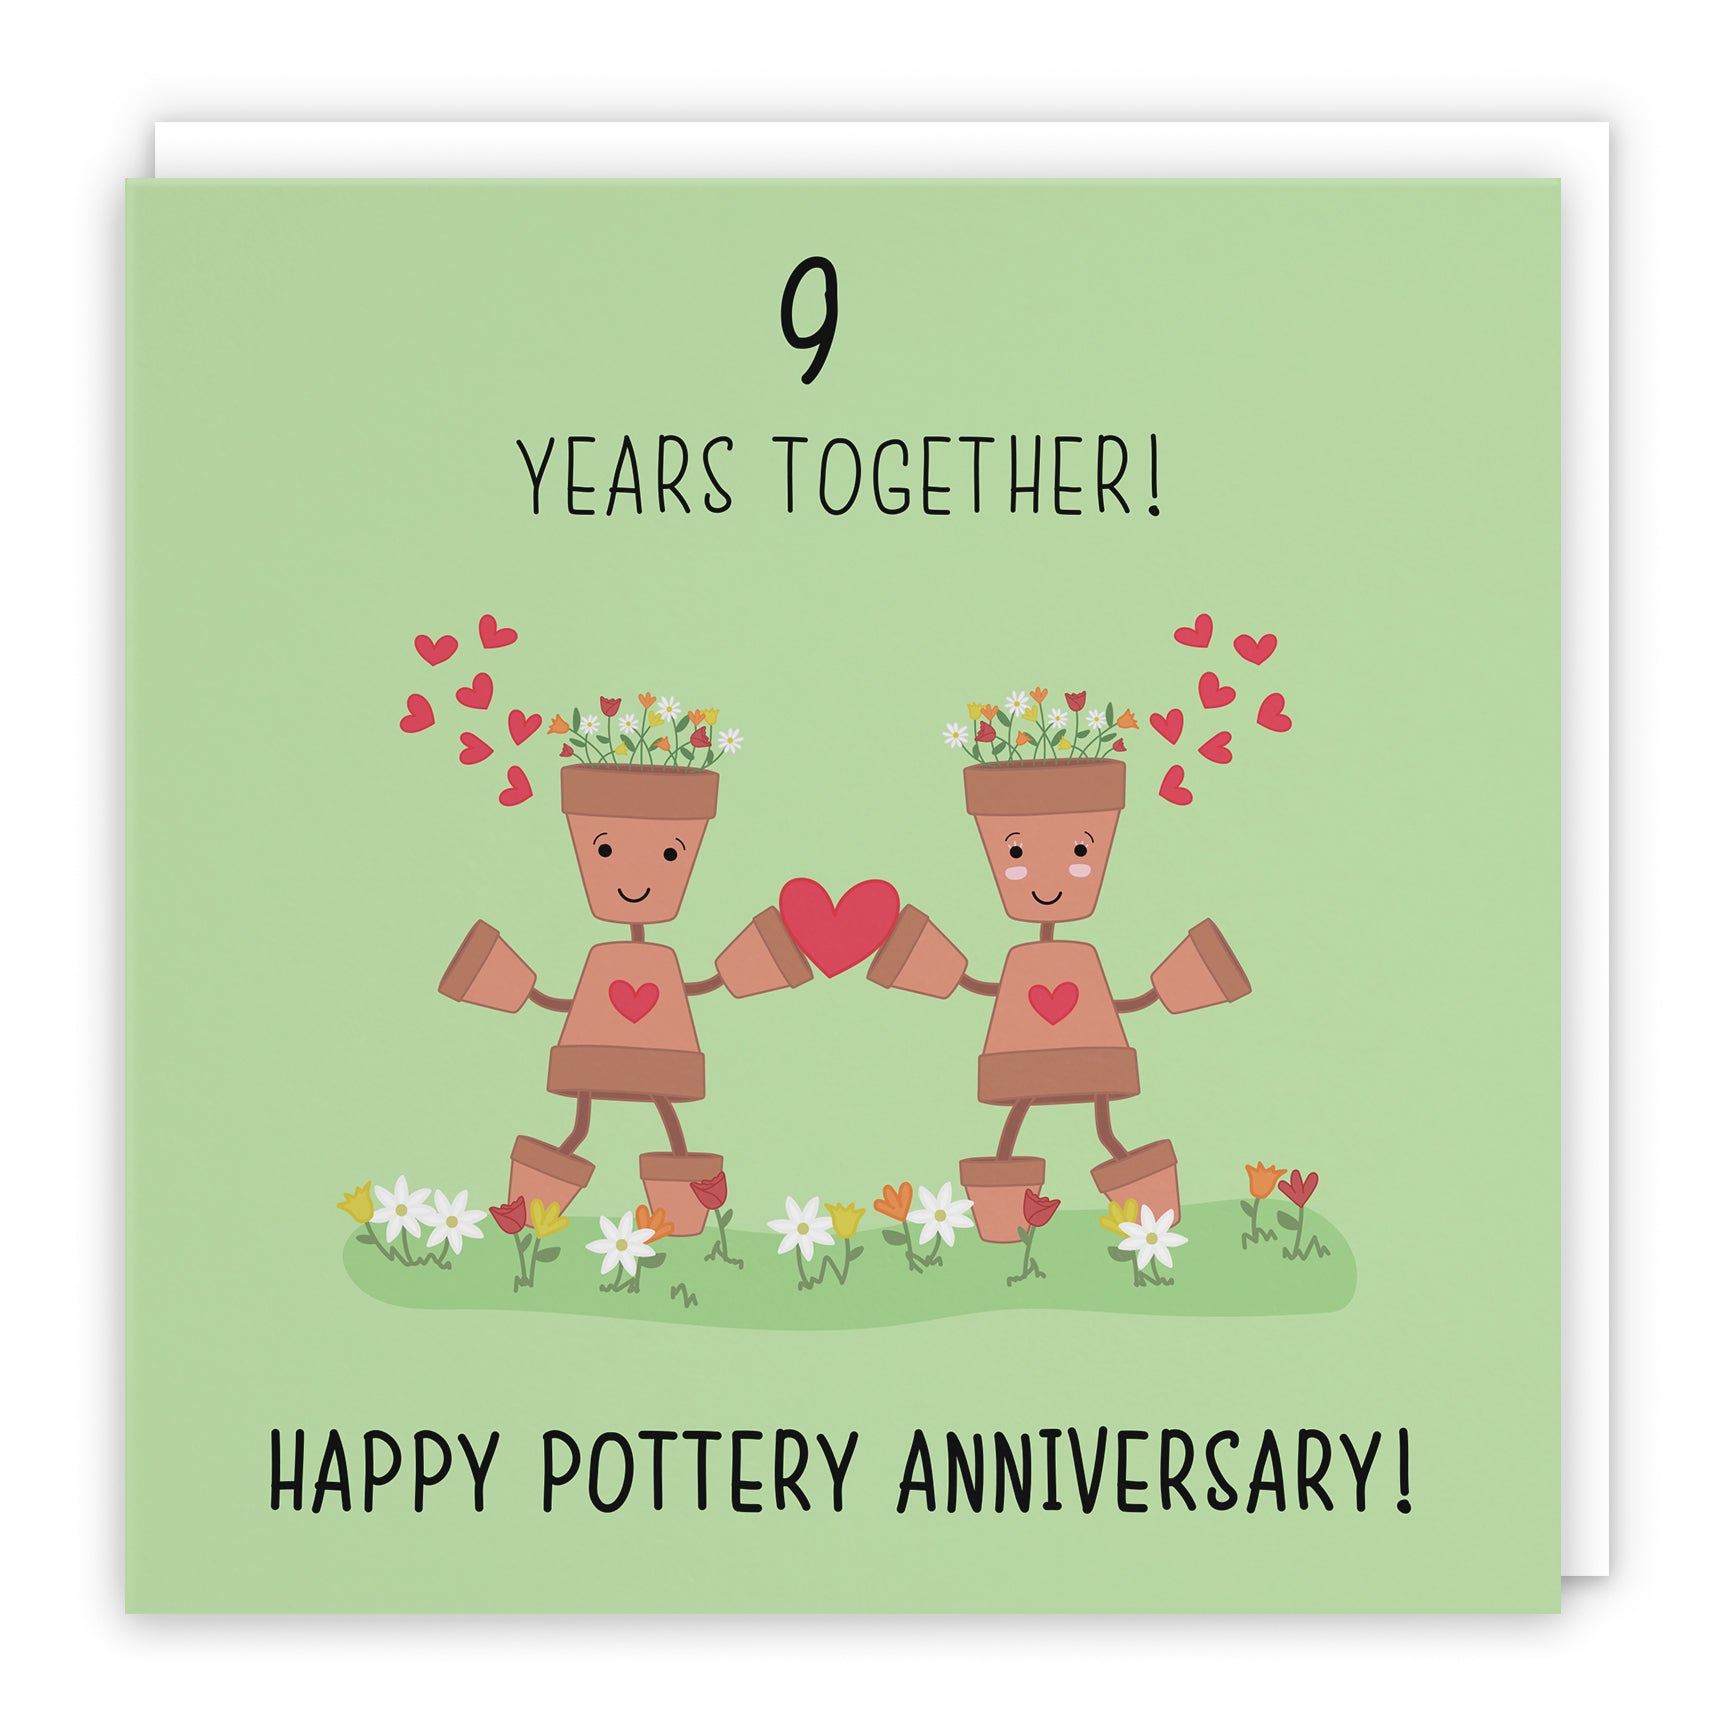 9th Anniversary Cards - Pottery Anniversary